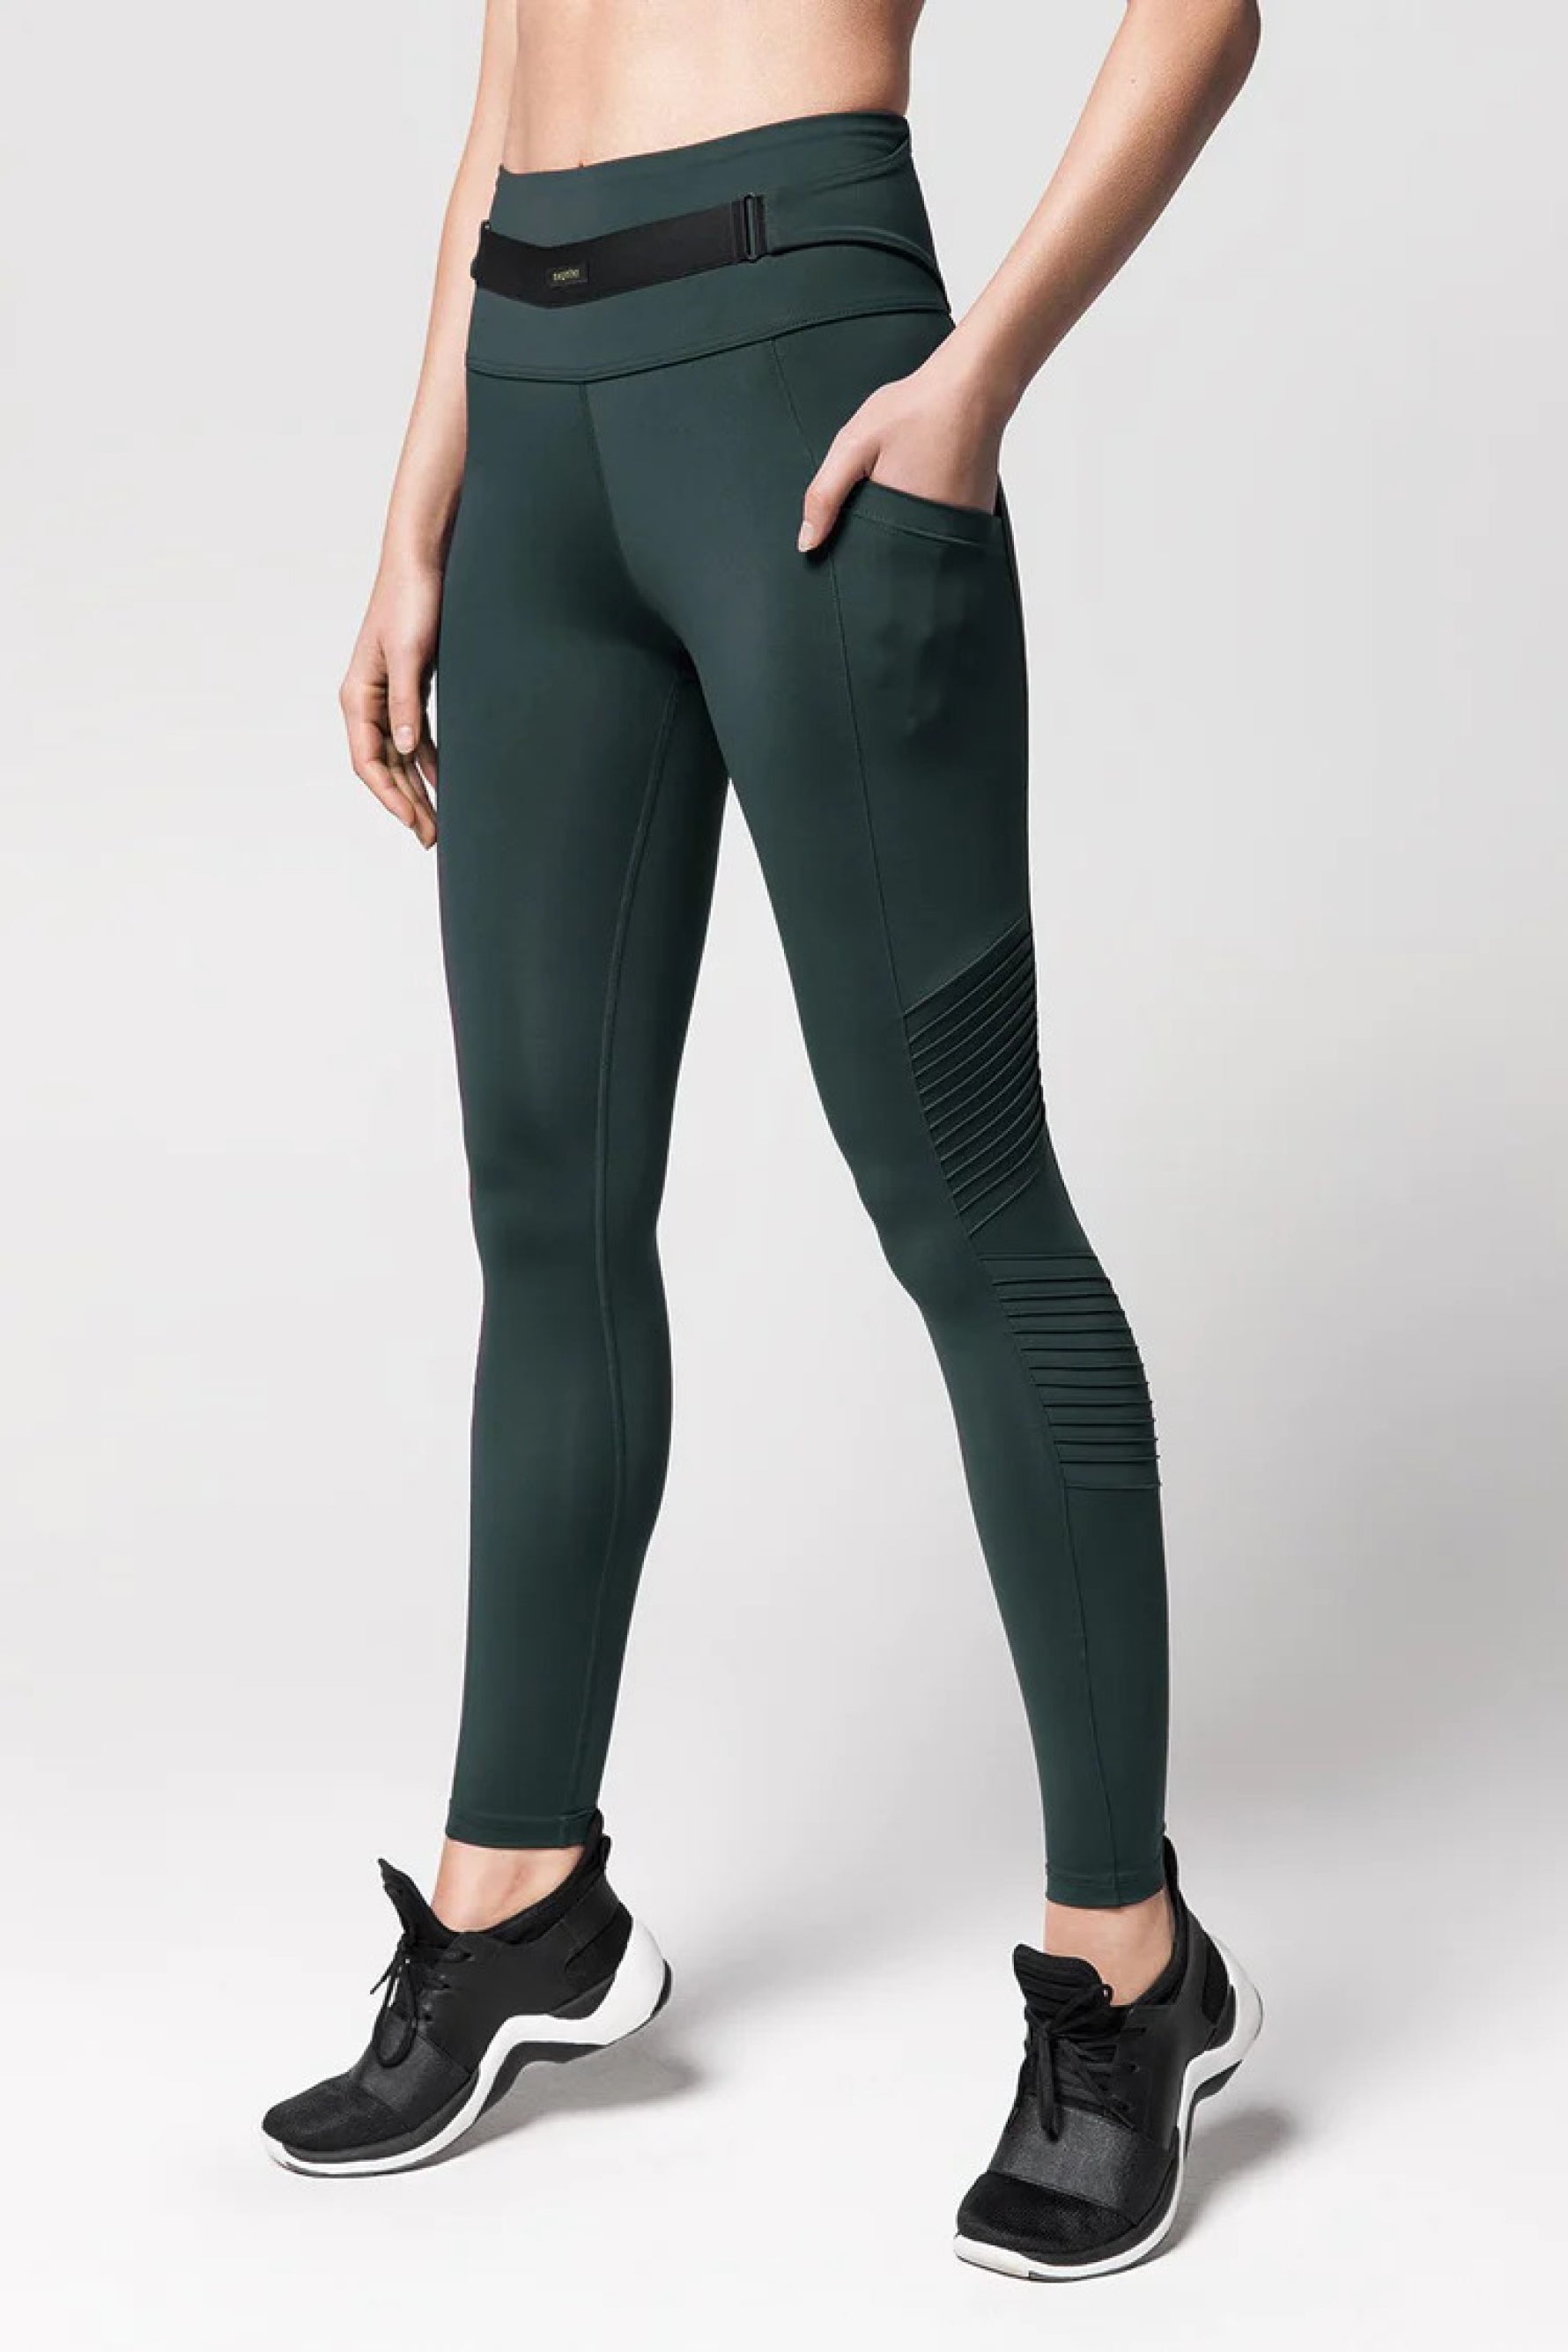 In 30 Seconds or Less: Athleta Headlands Hybrid Moto Tight